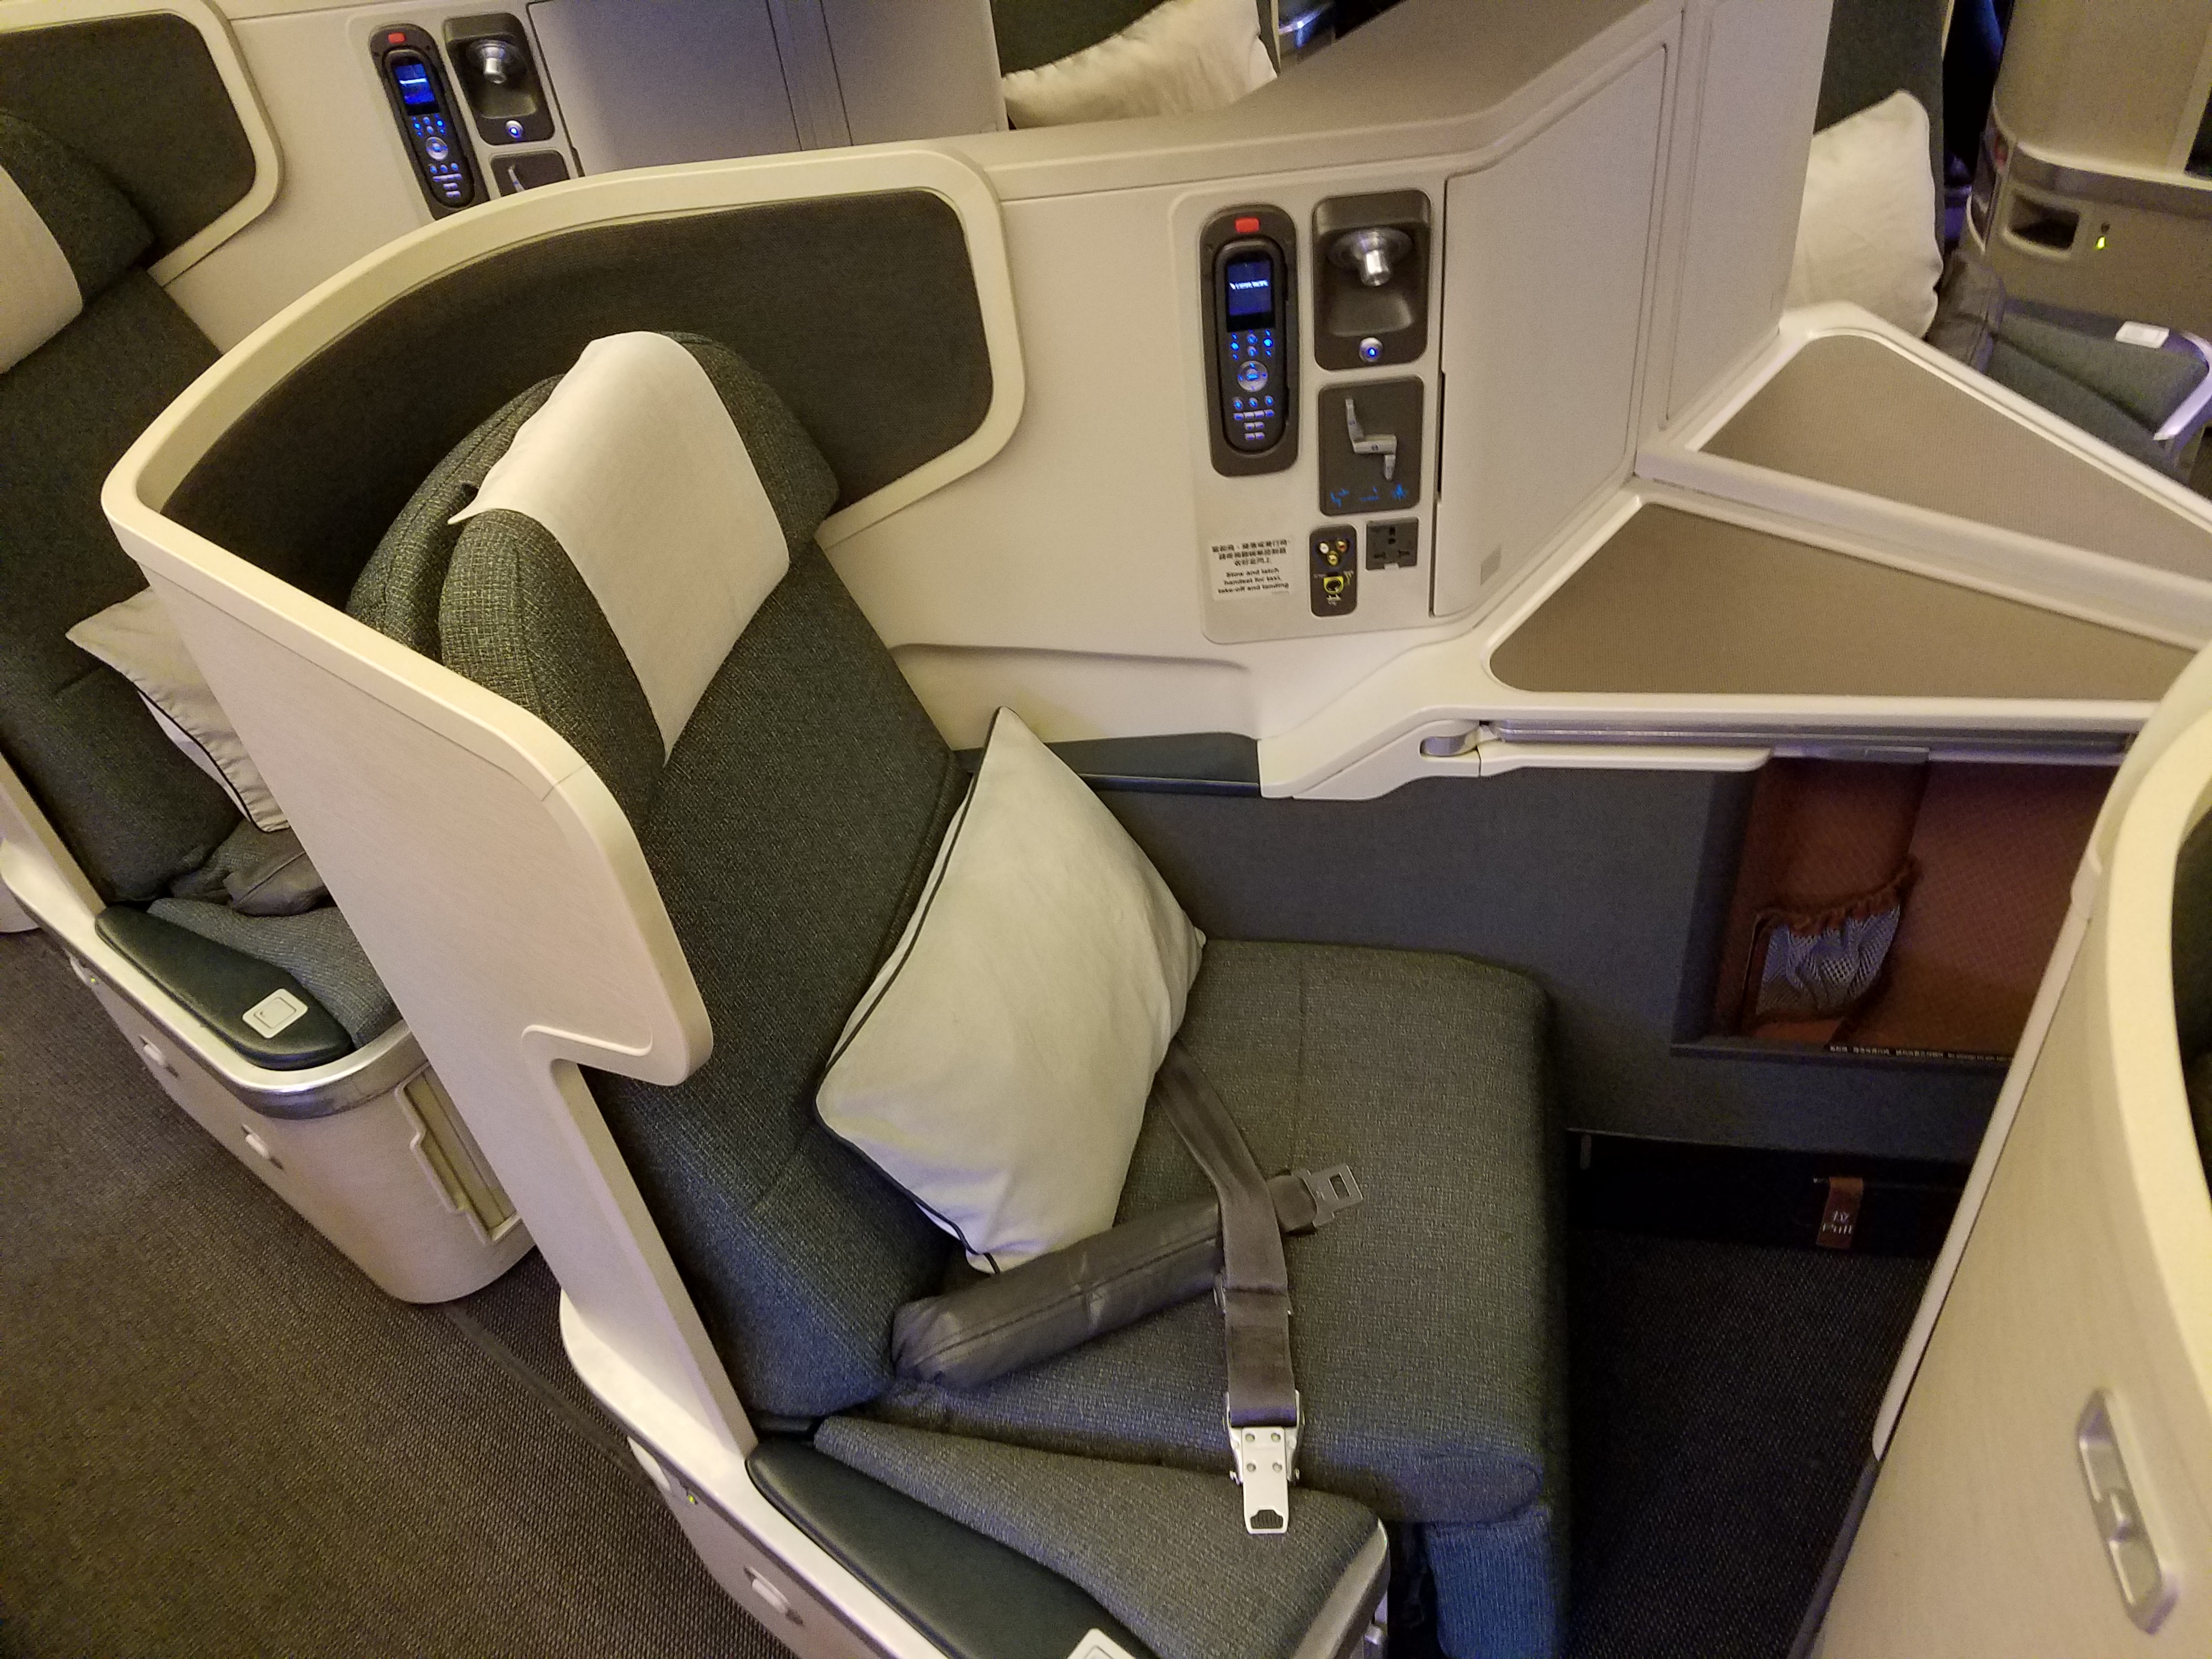 cathay pacific business class seat